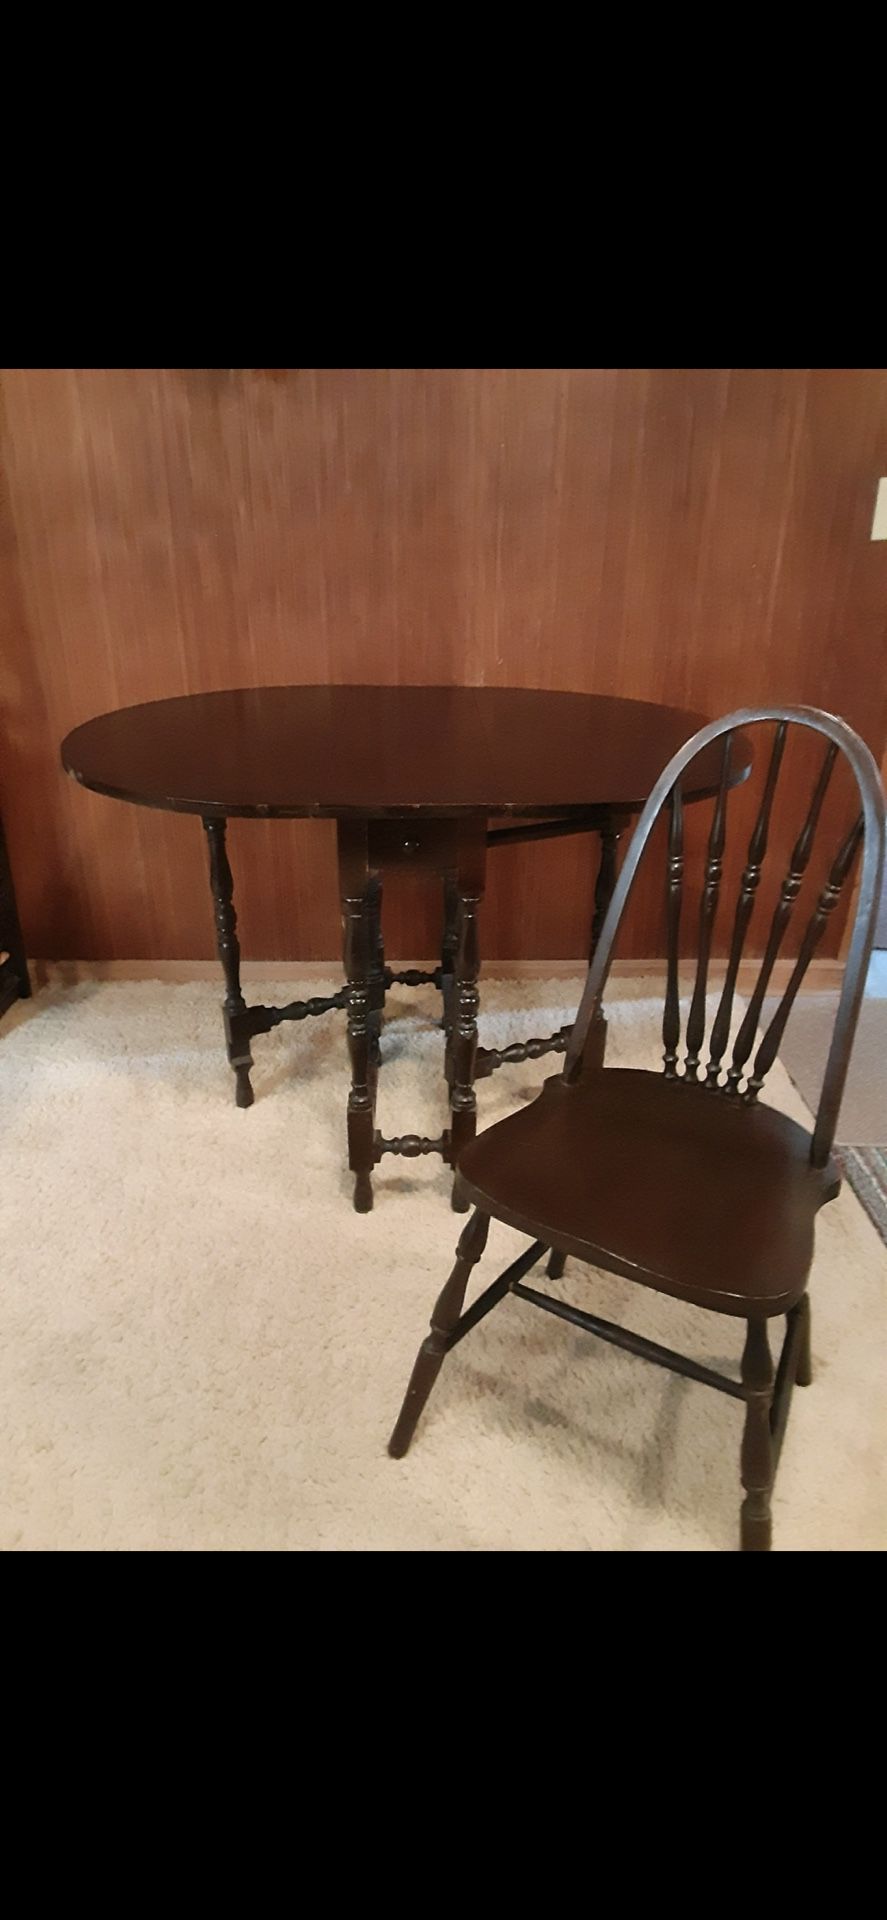 Antique Gateleg Table With Chair Black